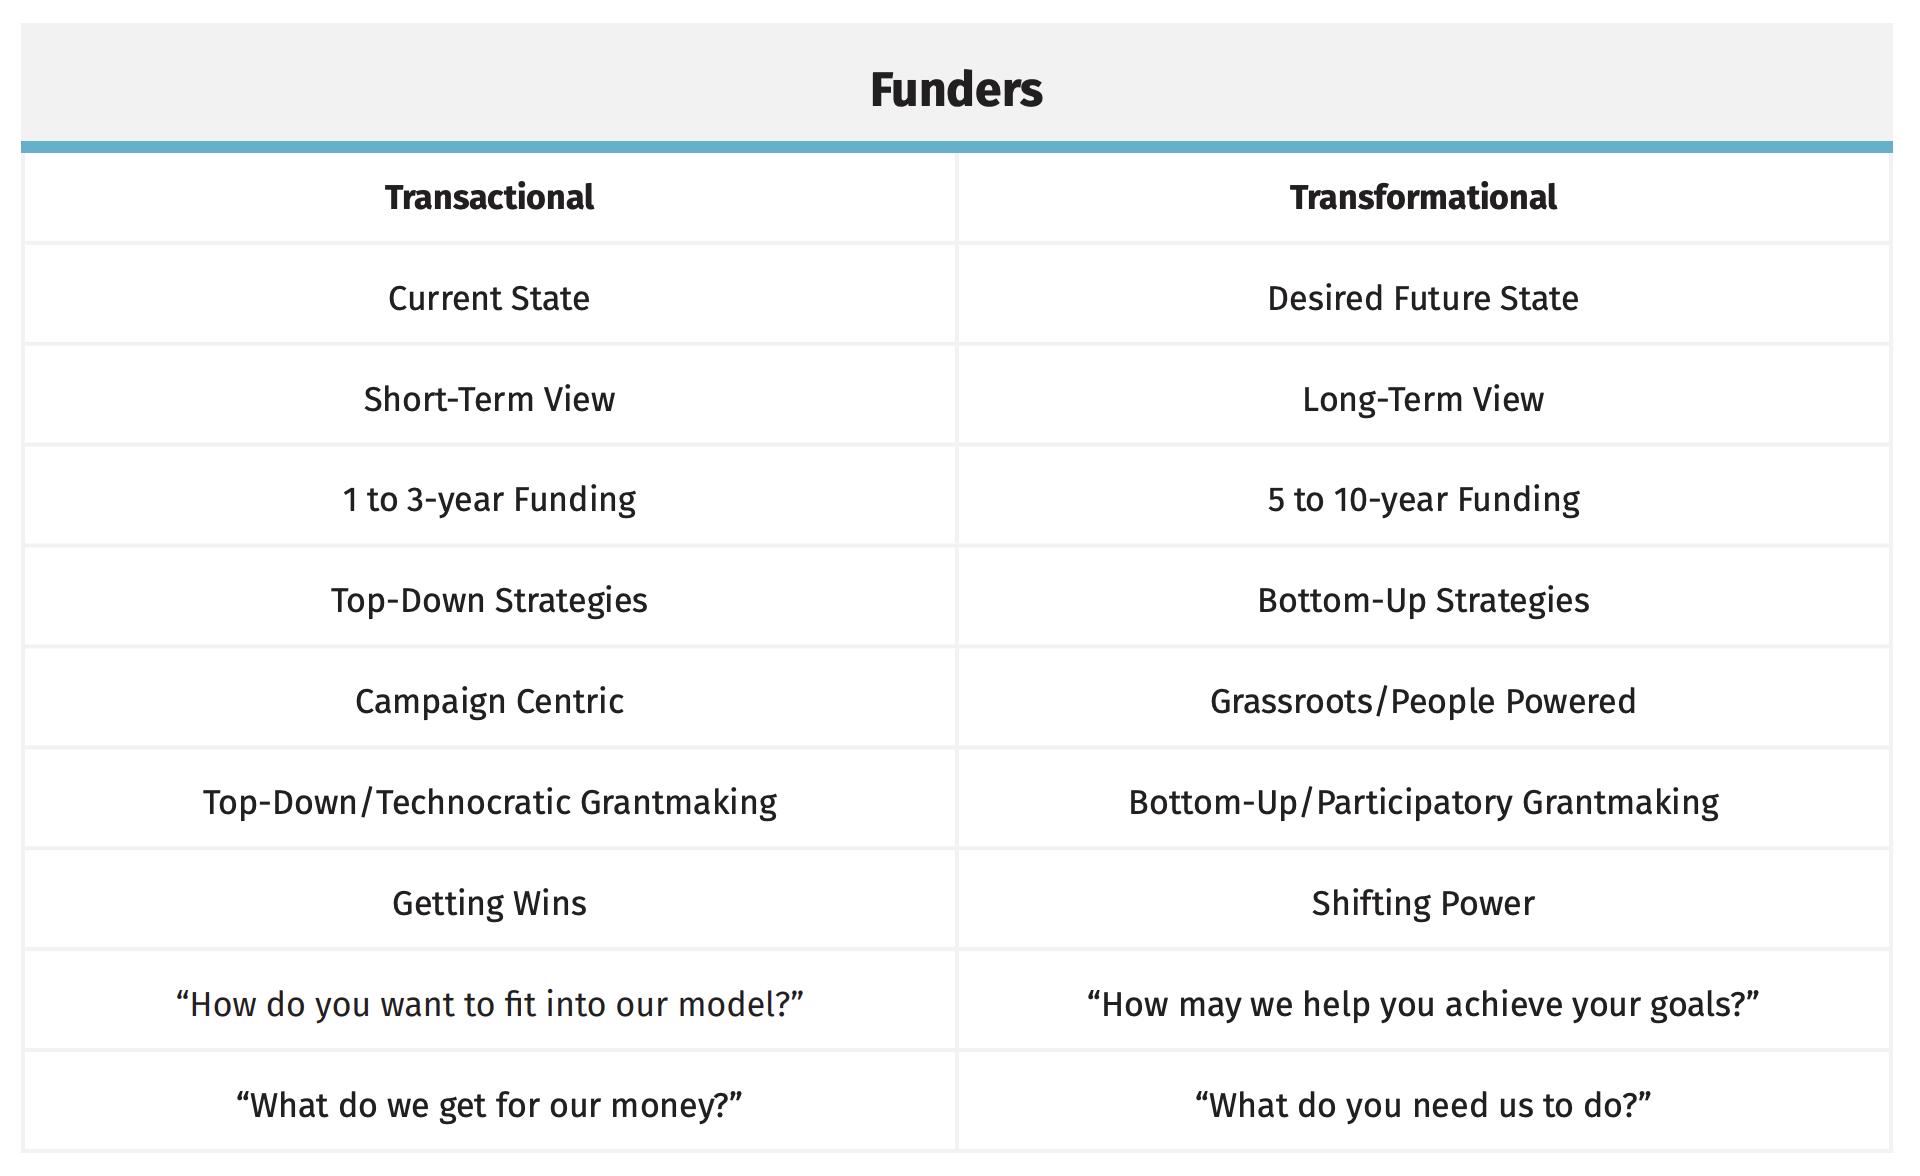 Summary of chart: Characteristics of transactional funding: Current State and has Short-Term View, 1 to 3-year Funding, Top-Down Strategies, Campaign Centric, Top-Down/Technocratic Grantmaking, Getting Wins, “How do you want to fit into our model?”, “What do we get for our money?”. Characteristics of transformational funding: Desired Future State, Long-Term View, 5 to 10-year Funding, Bottom-Up Strategies, Grassroots/People Powered, Bottom-Up/Participatory Grantmaking, Shifting Power, “How may we help you achieve your goals?”, “What do you need us to do?”